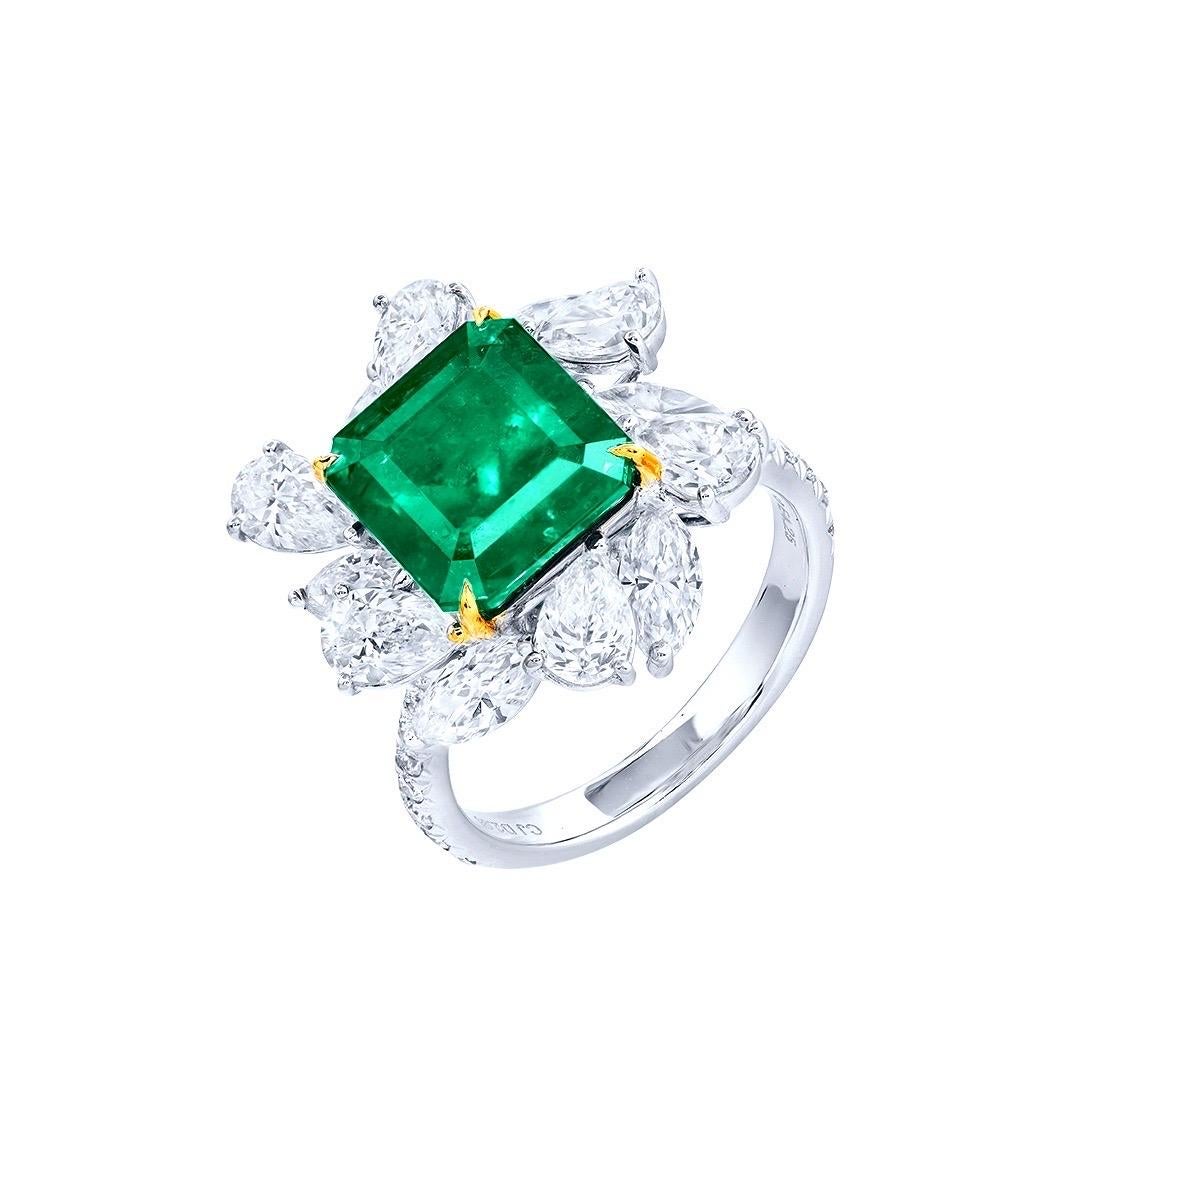 From the Museum Vault At Emilio Jewelry located on New York's iconic Fifth Avenue,
Center Stone: Gubelin certified as no oil untreated Colombian 4.25 carat Green OCTAGONAL
Setting: 6 fancy-cut white diamonds totaling about 1.70 carats, 6 fancy-cut